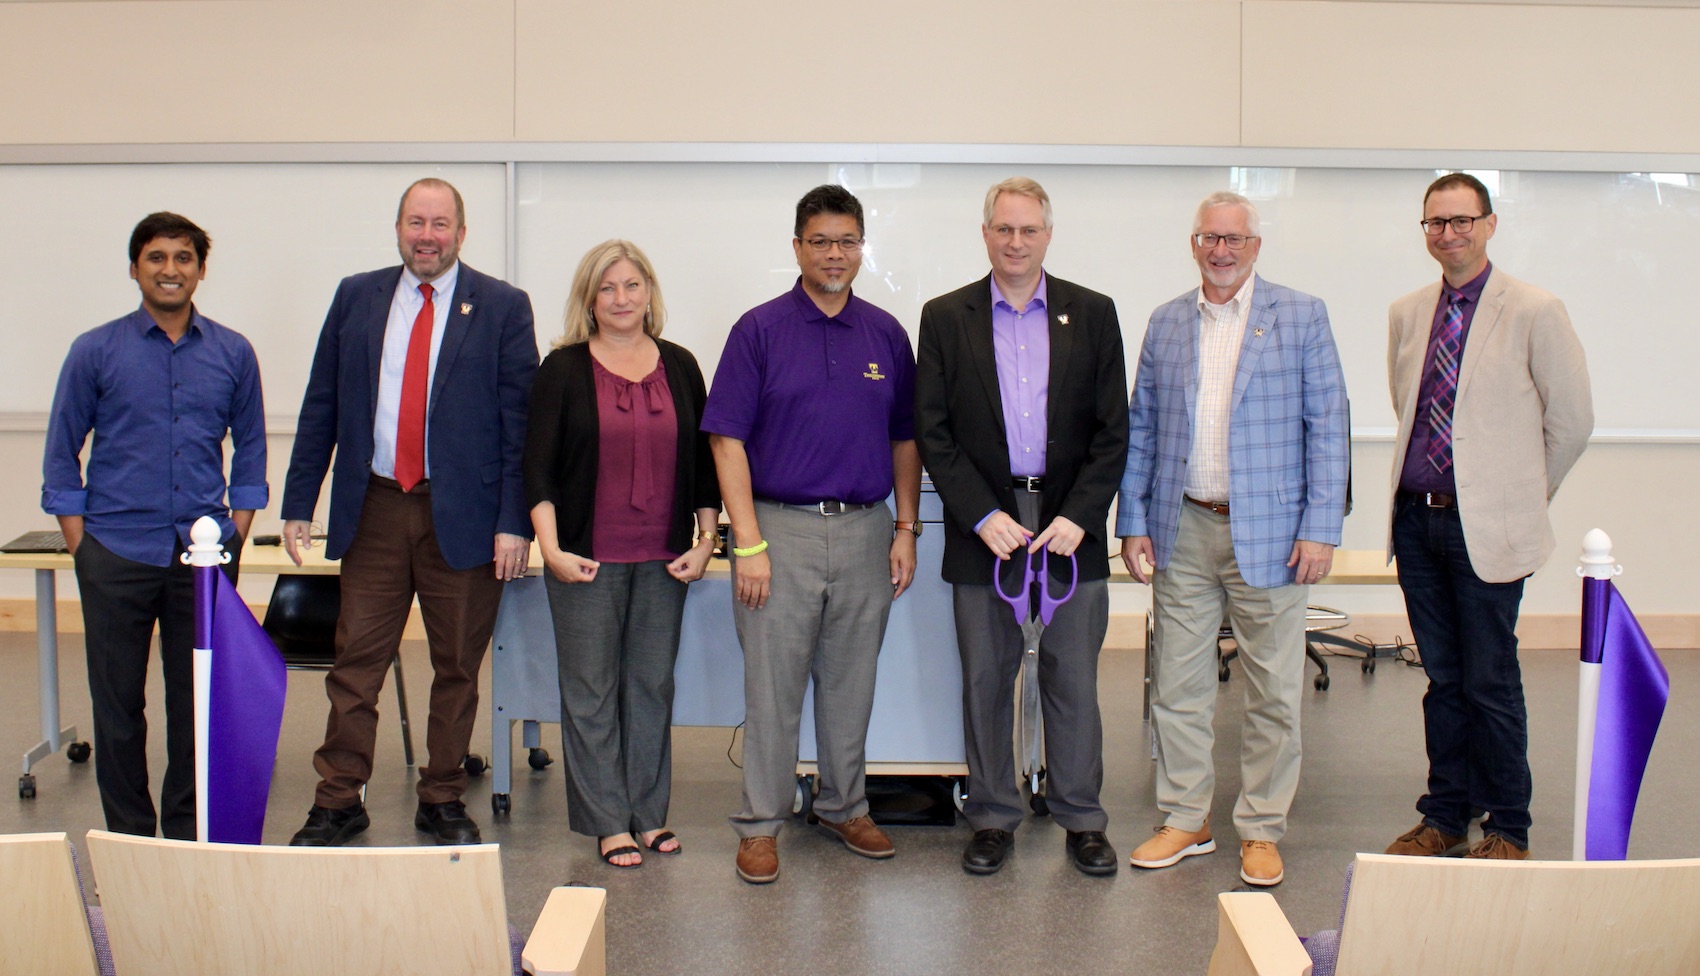 Cutting the ribbon for the opening of Tennessee Tech’s Science DMZ research network are, from left, Susmit Shannigrahi, assistant professor of computer science; Carl Pinkert, interim vice president for research; Lori Mann-Bruce, provost; Gerald Gannod, chair of the computer science department; Joseph C. Slater, dean of the College of Engineering; Philip Oldham, president of Tennessee Tech; and David Hales, information technology services assistant director for network operations.